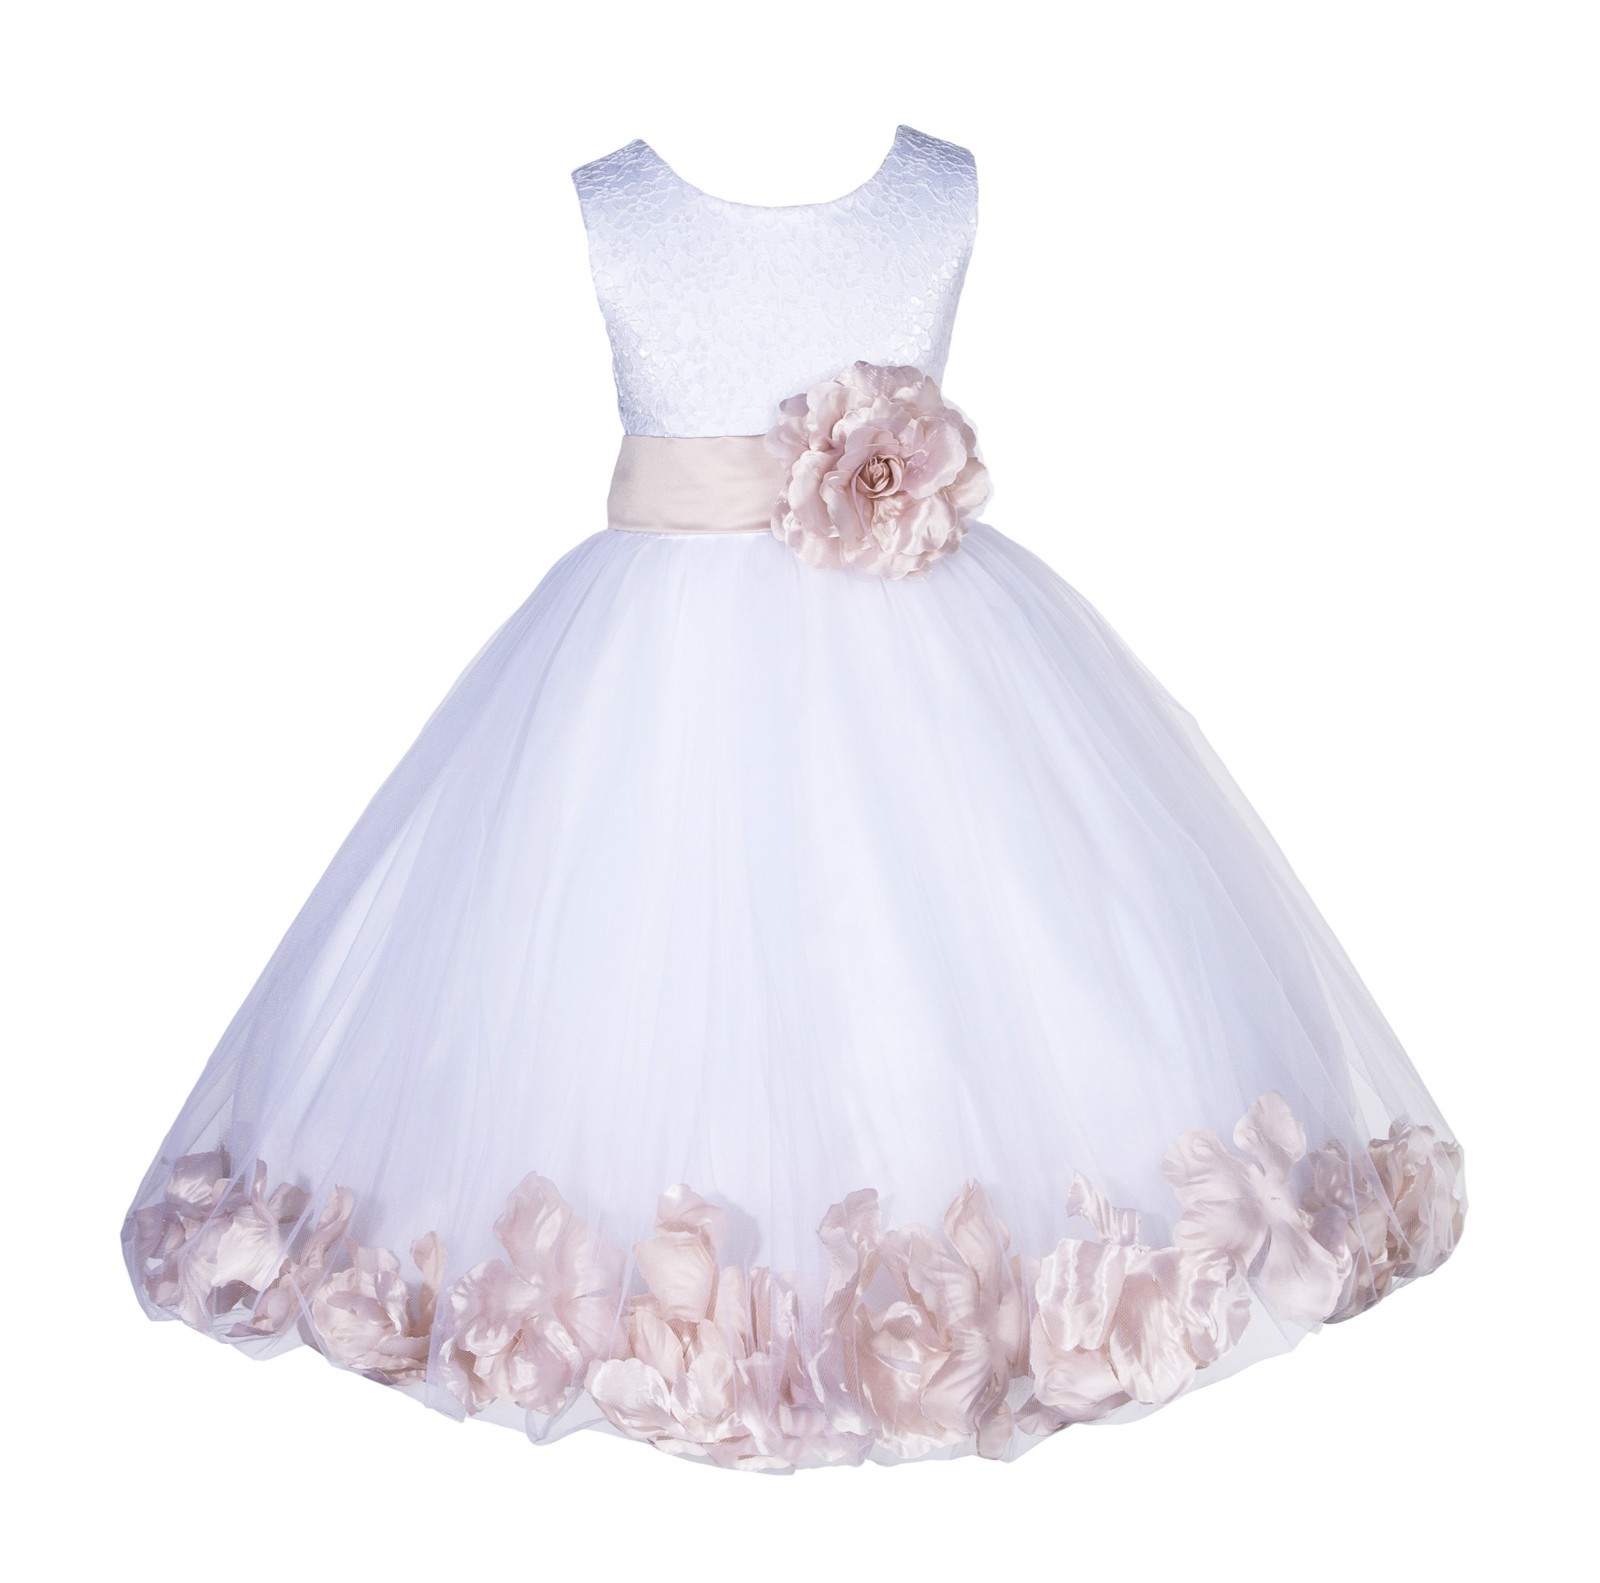 White/Blush pink Lace Top Tulle Floral Petals Flower Girl Dress 165S